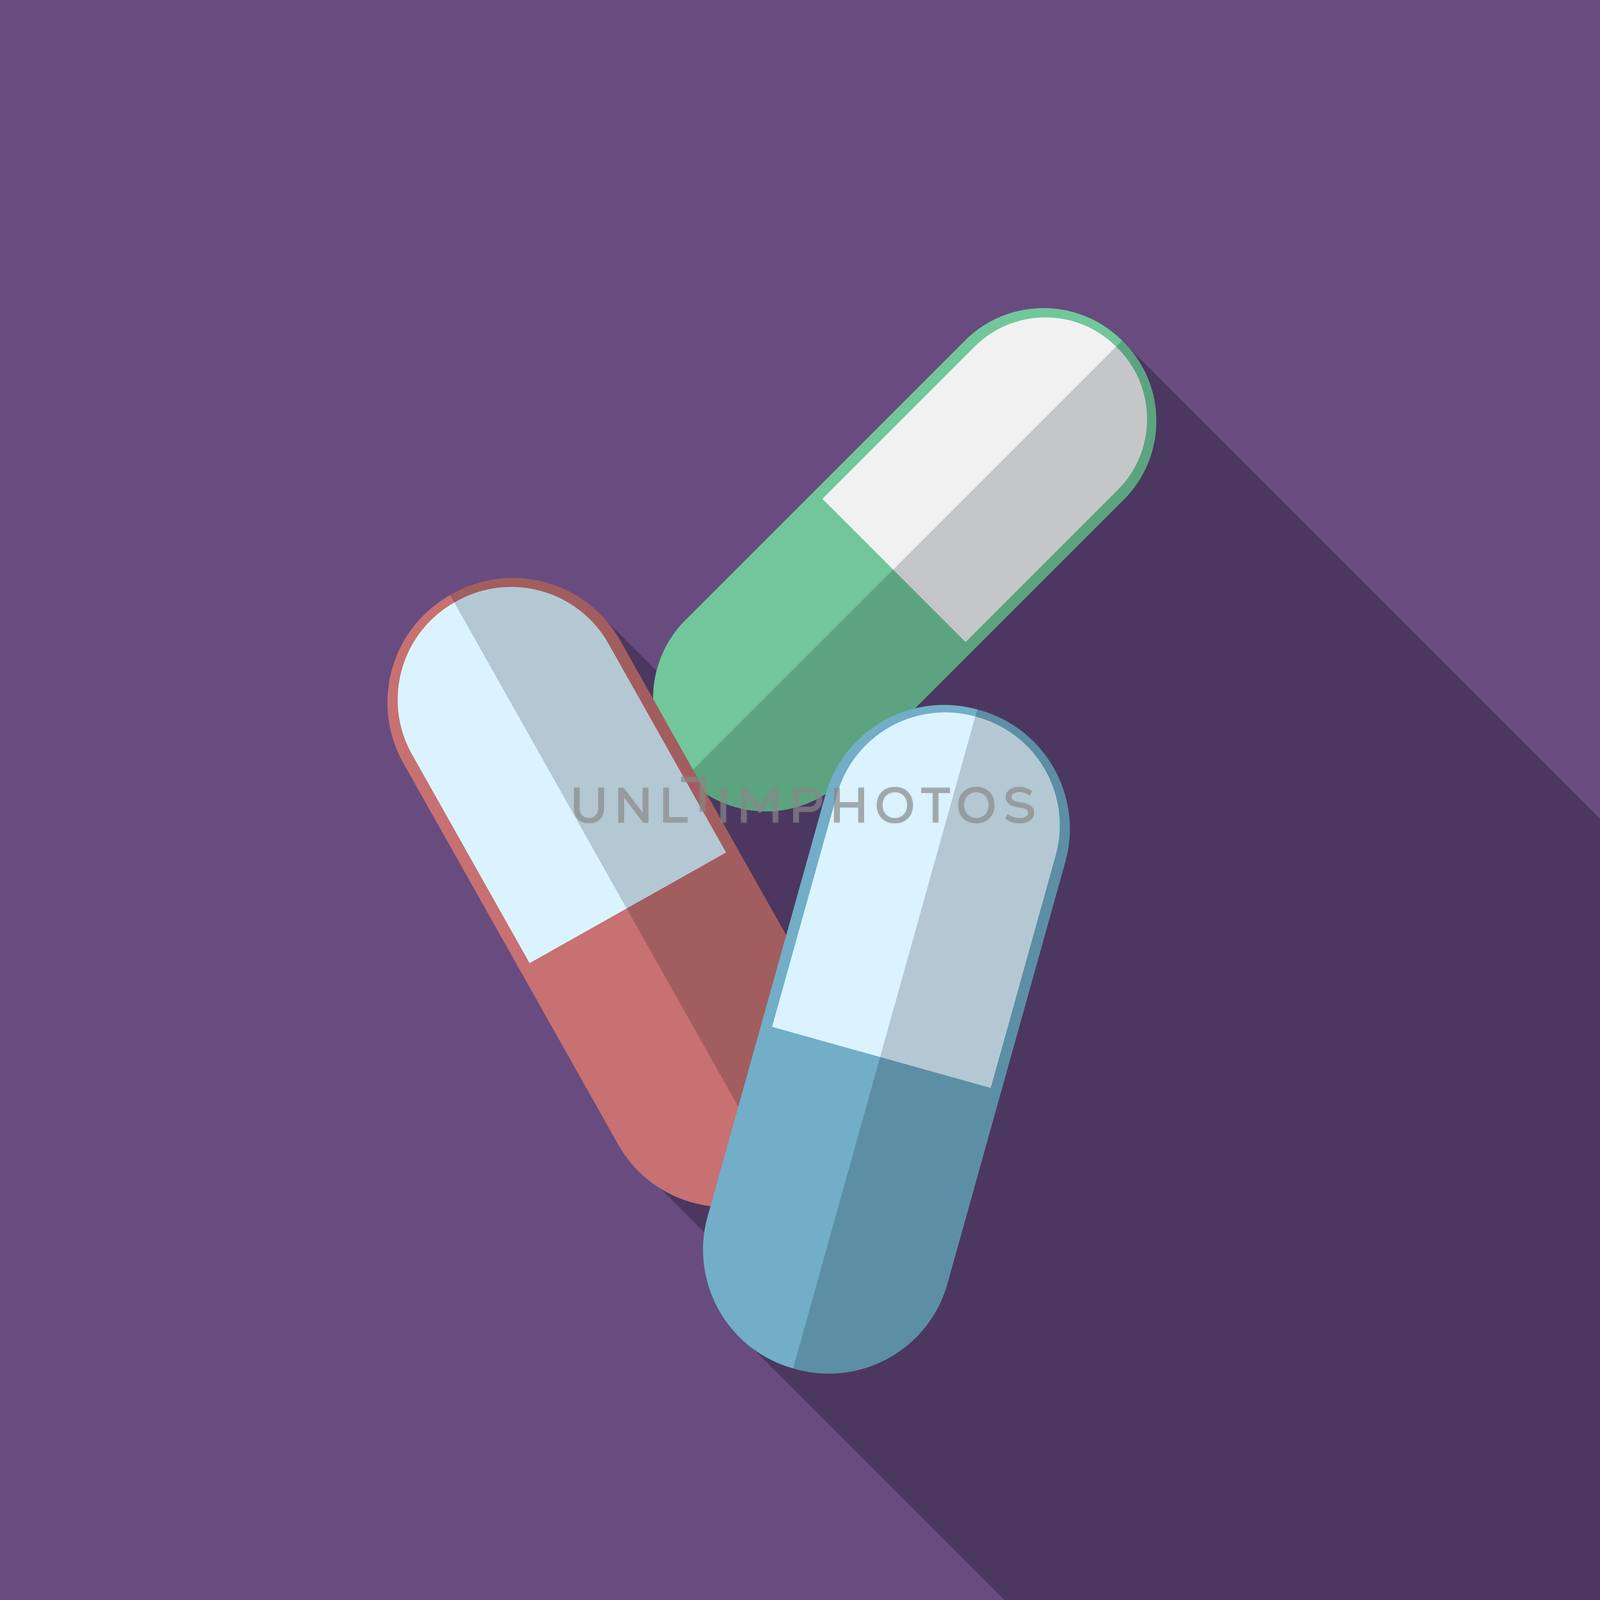 Flat design modern vector illustration of medical pills icon with long shadow by Lemon_workshop